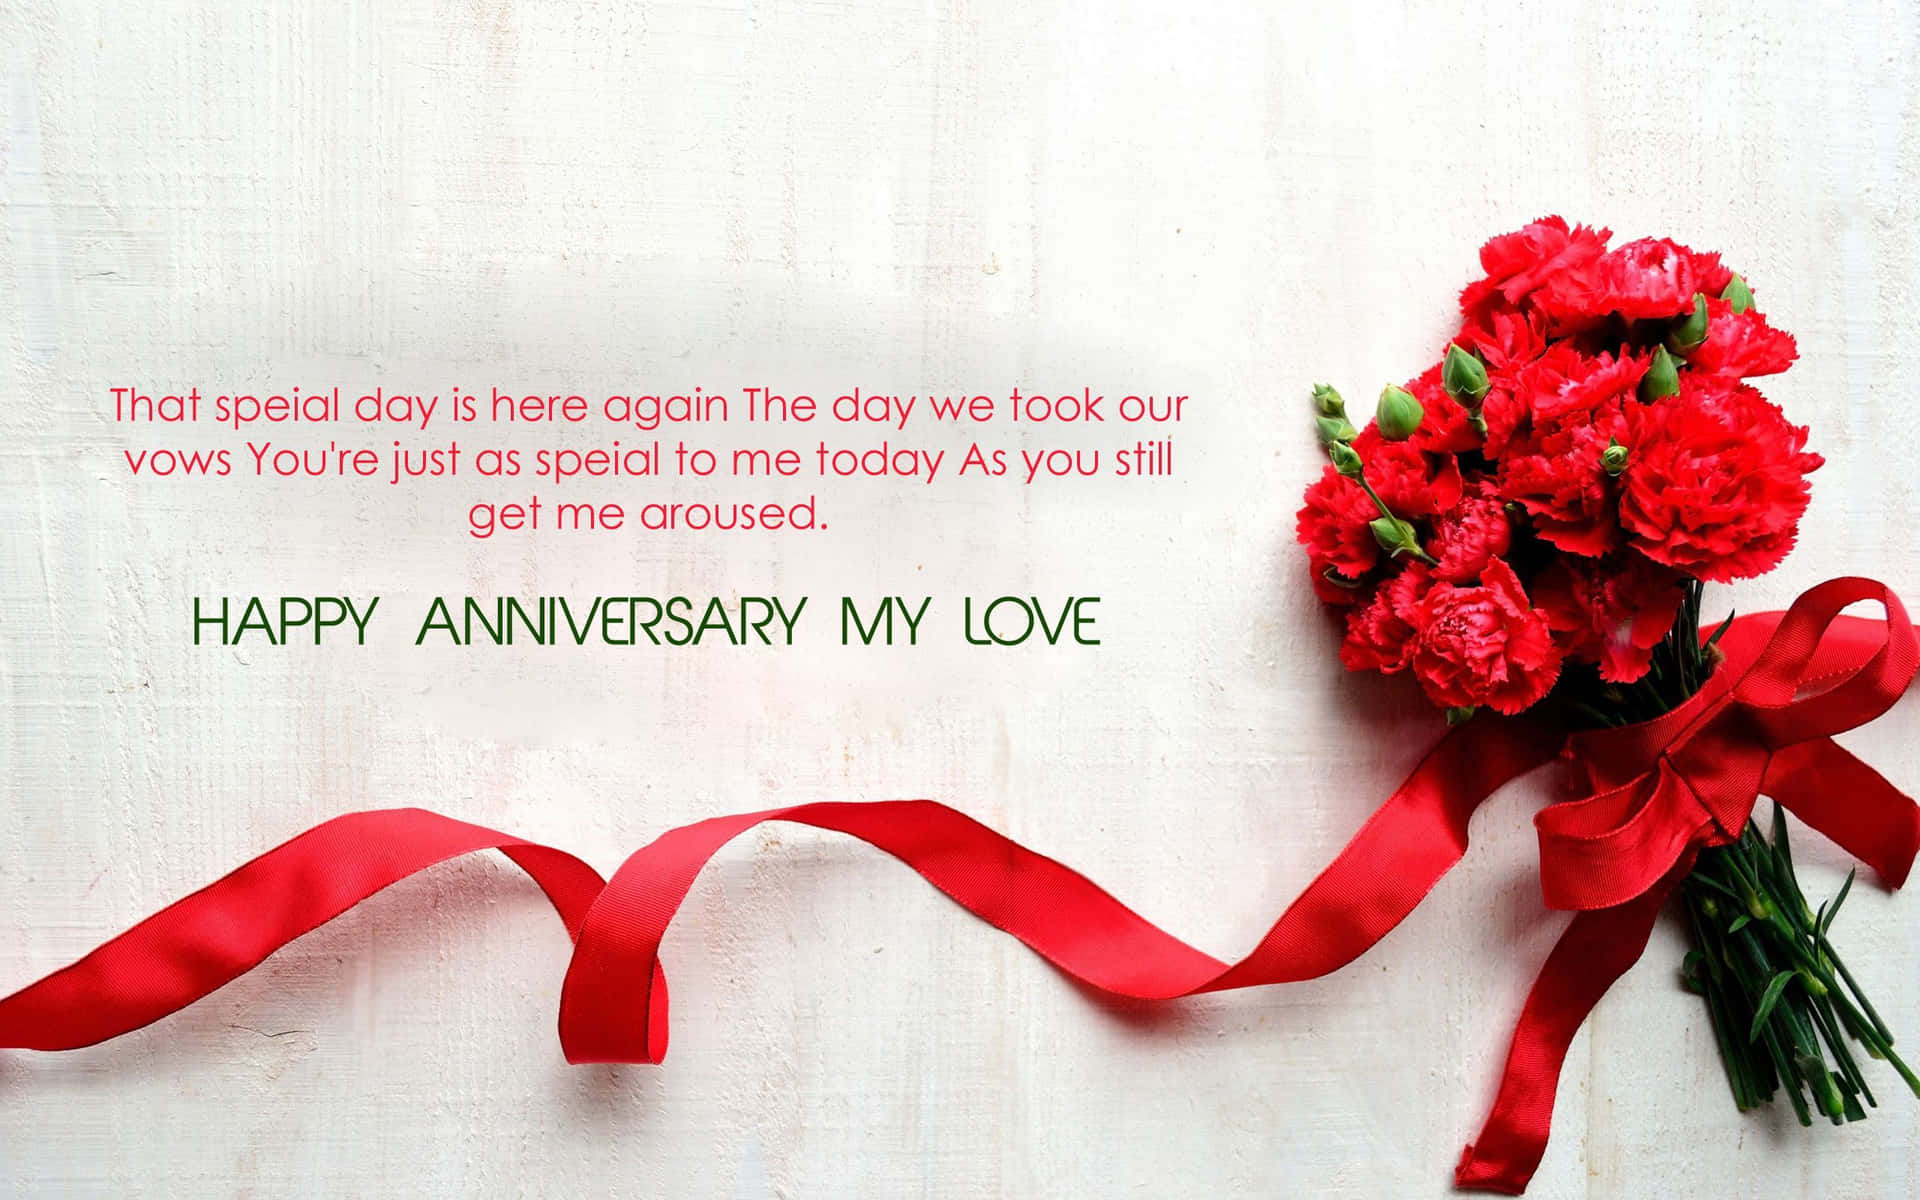 Happy Anniversary My Love Roses Bouquet Picture